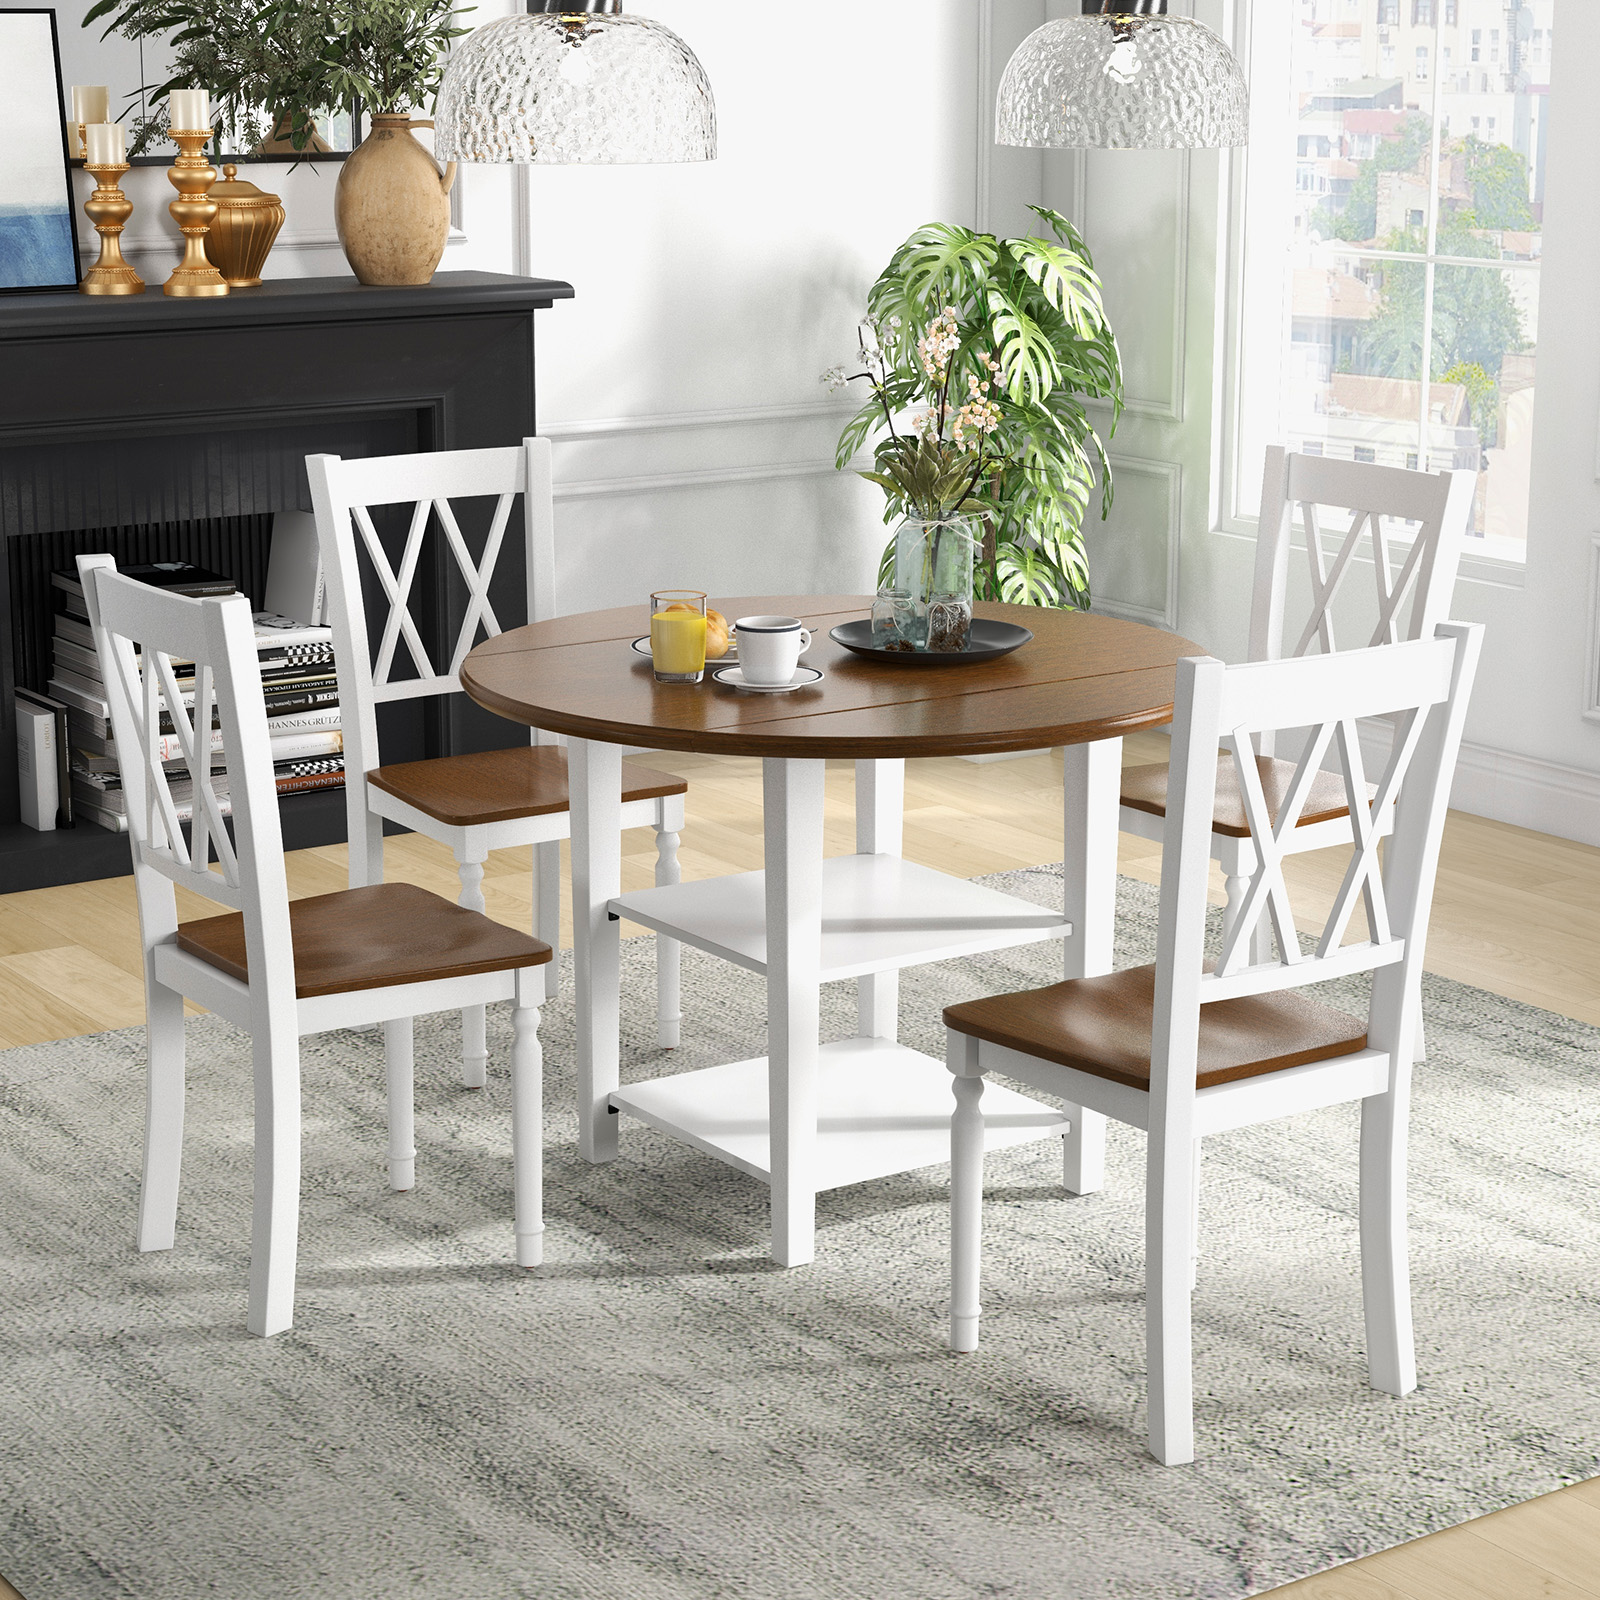 5_Pieces_Extendable_Dining_Table_Set_with_2_Tier_Storage_Shelf_and_High_Backrest-5.jpg